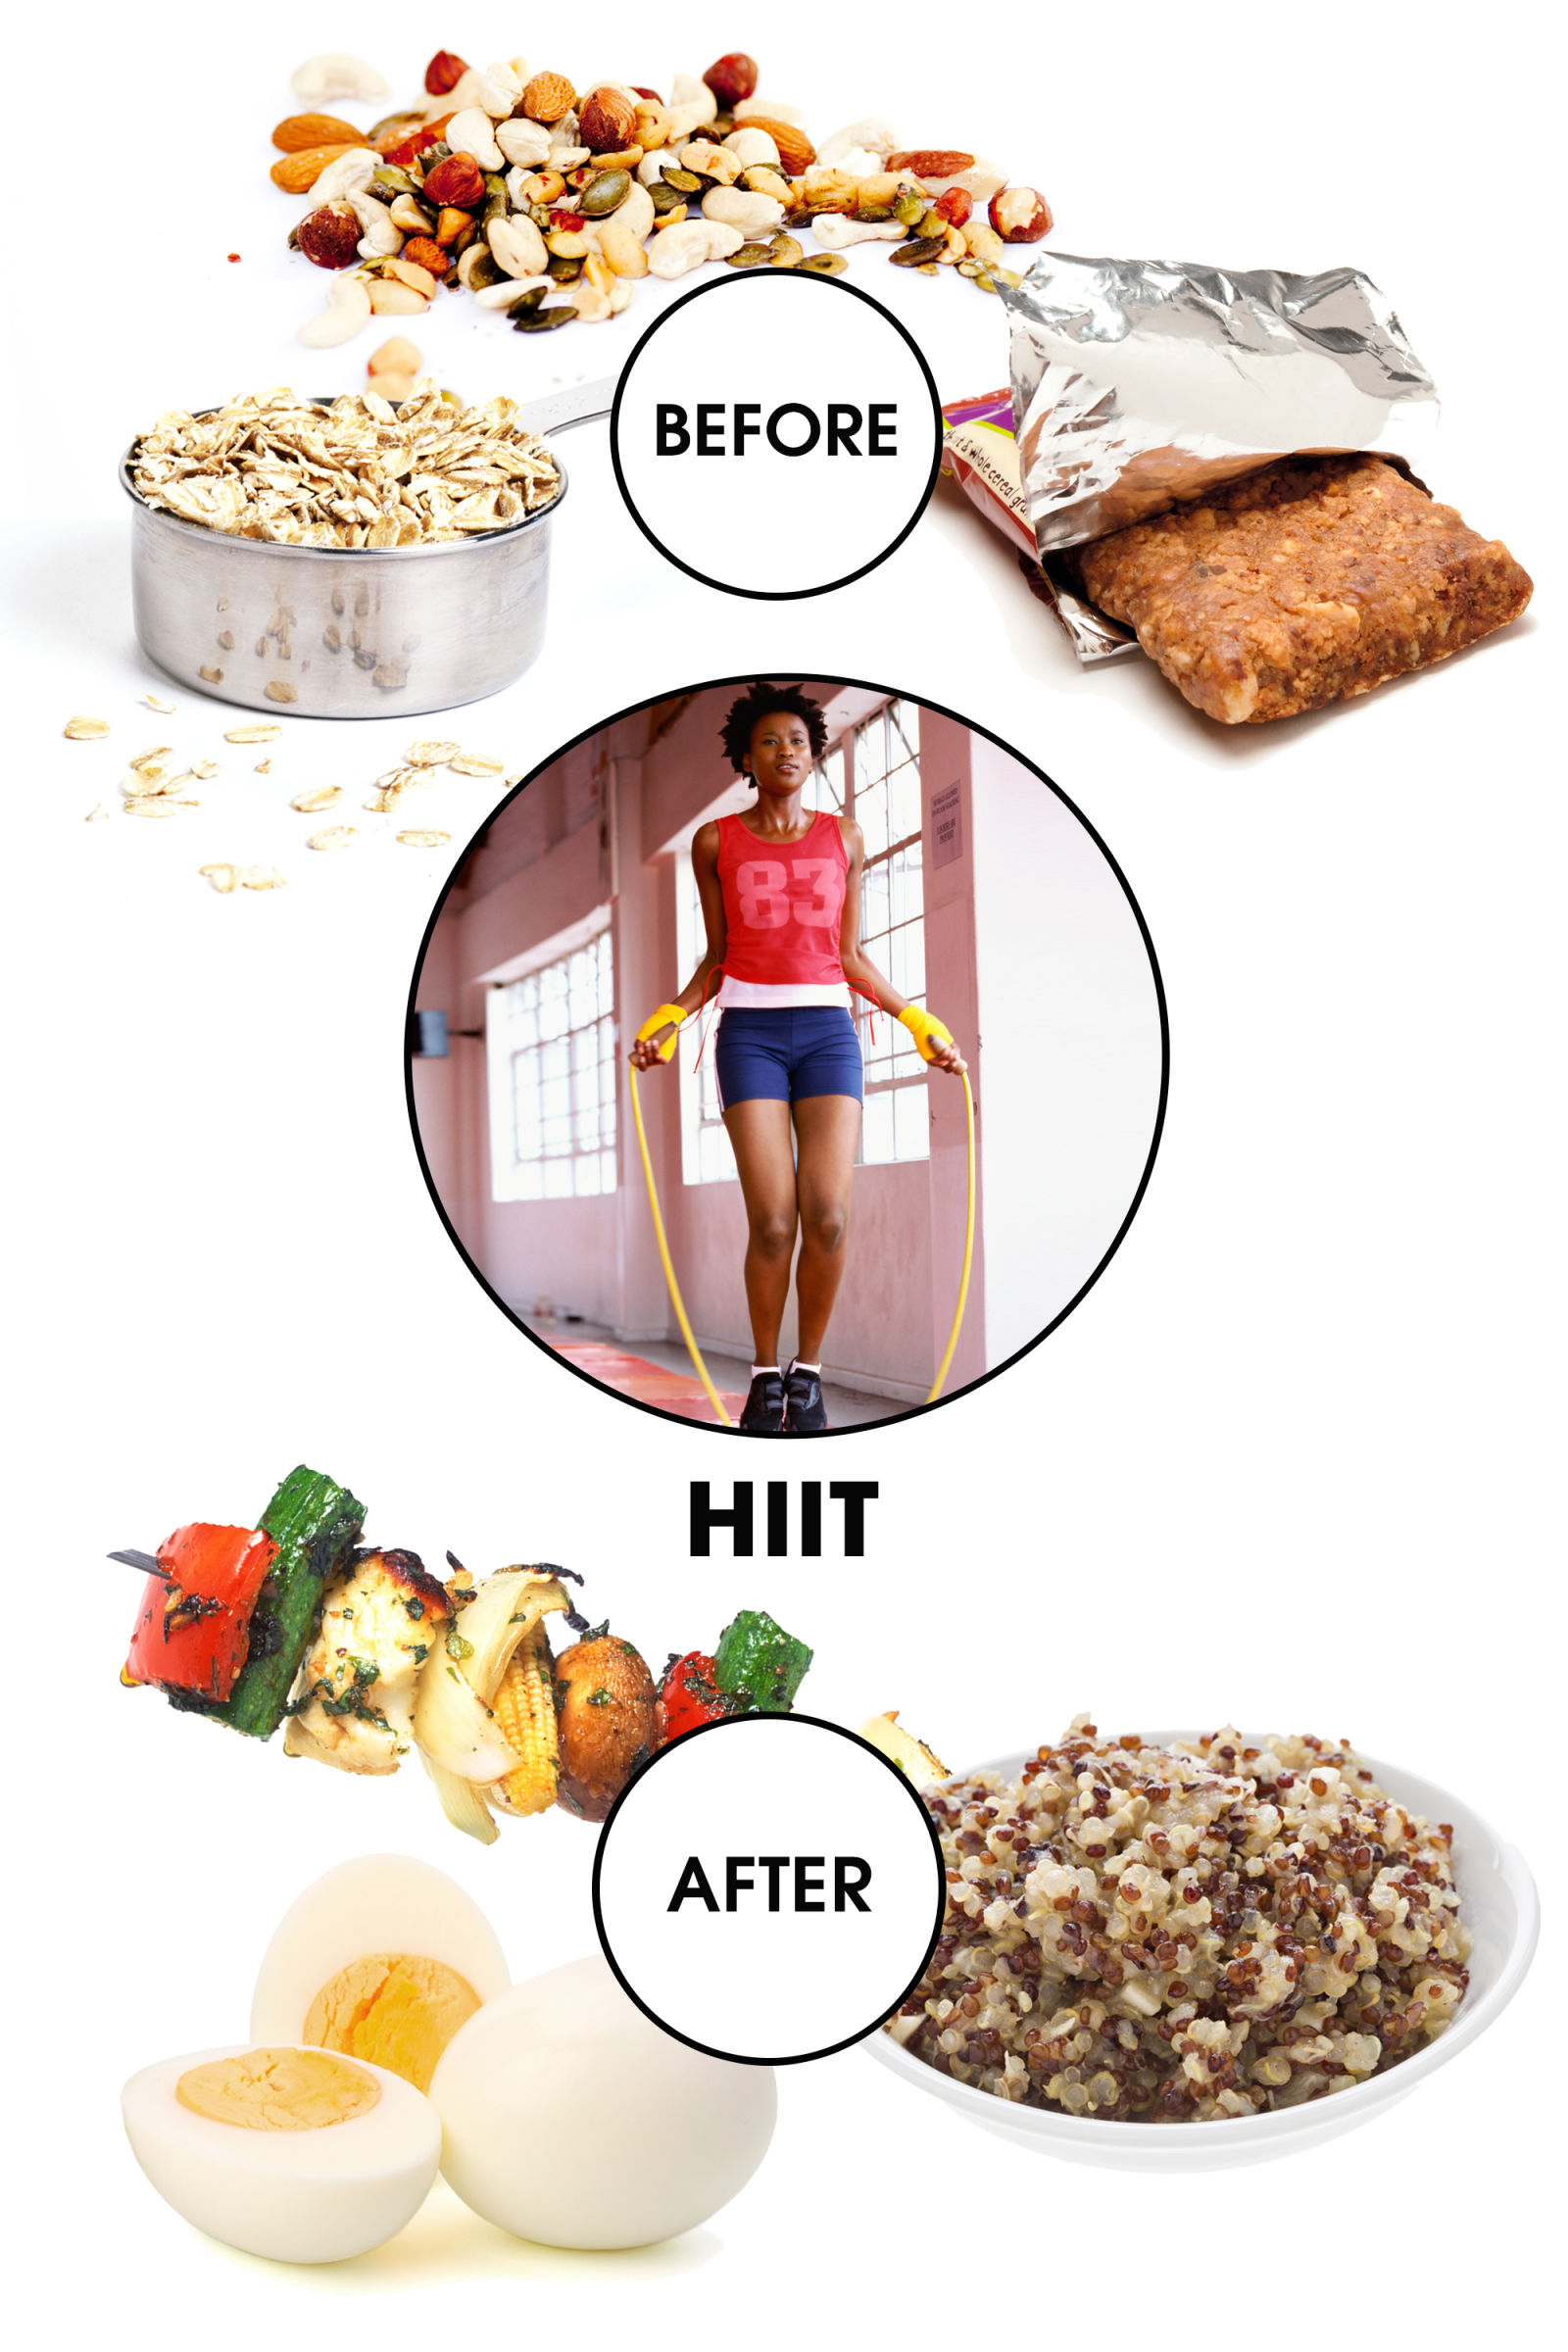 Eating After Exercise Is Especially Important If You Work Out Fasted